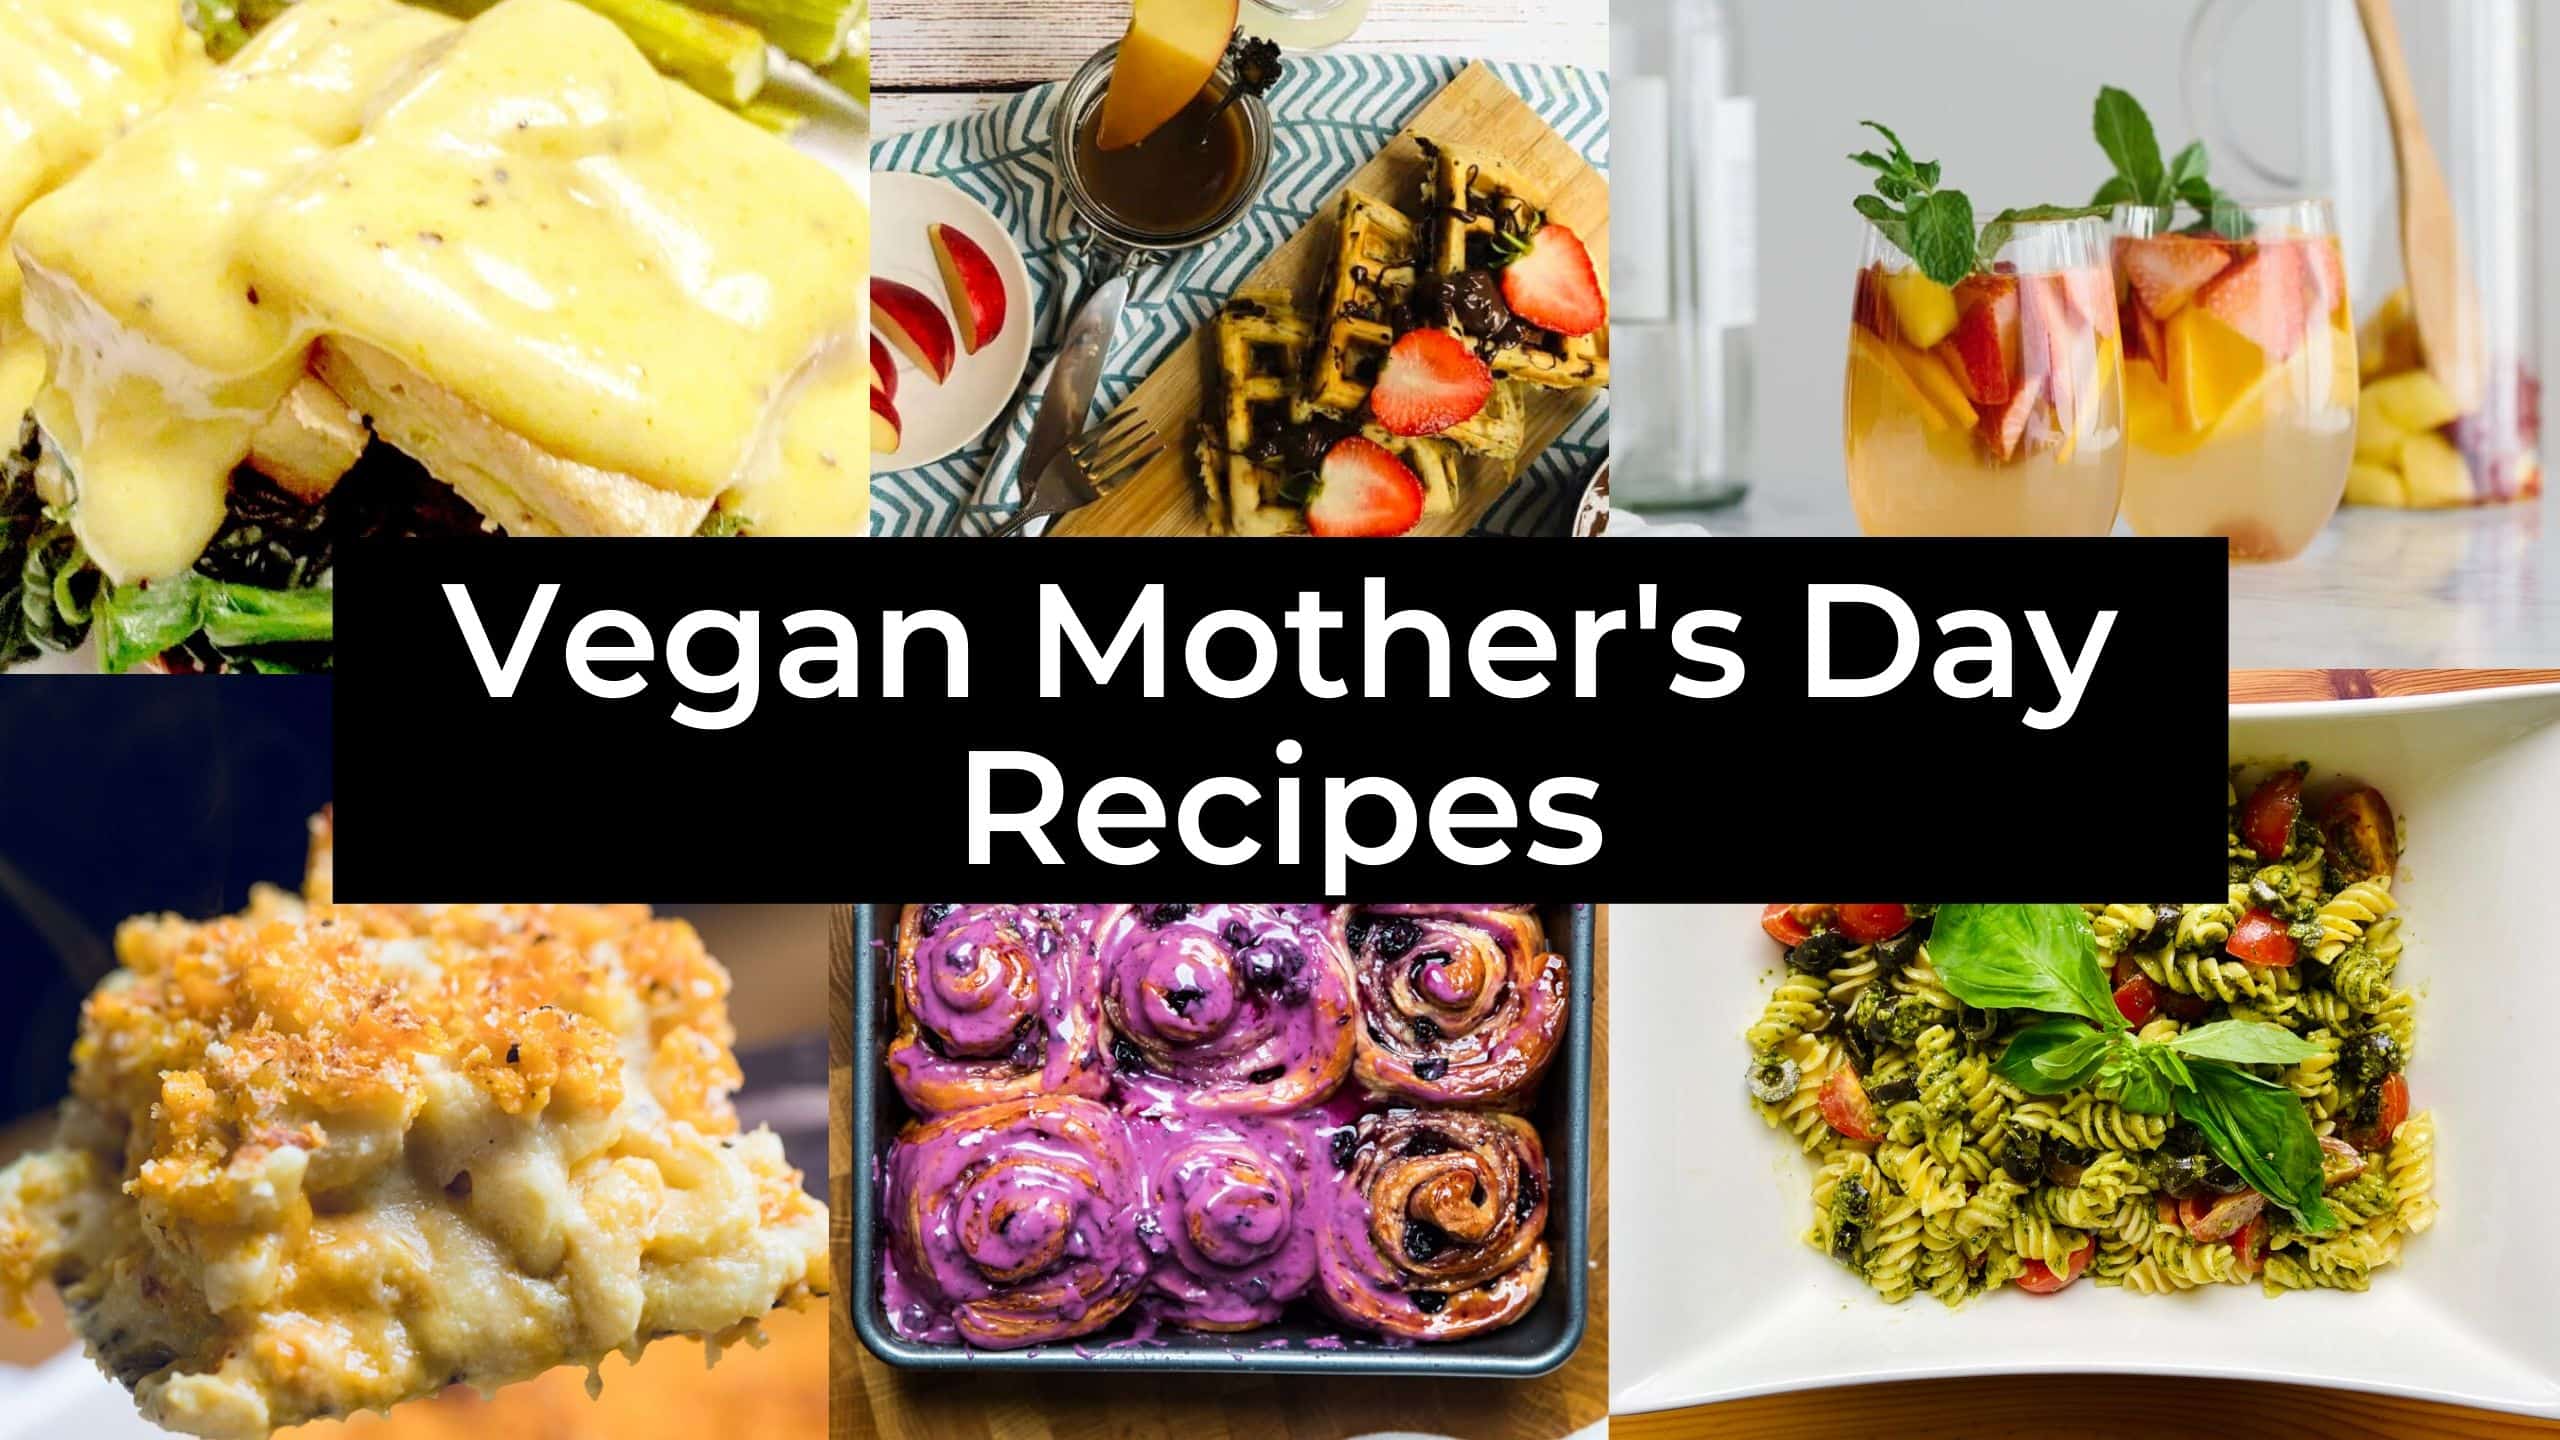 42 Vegan Mother’s Day Brunch, Desserts, and Dinners